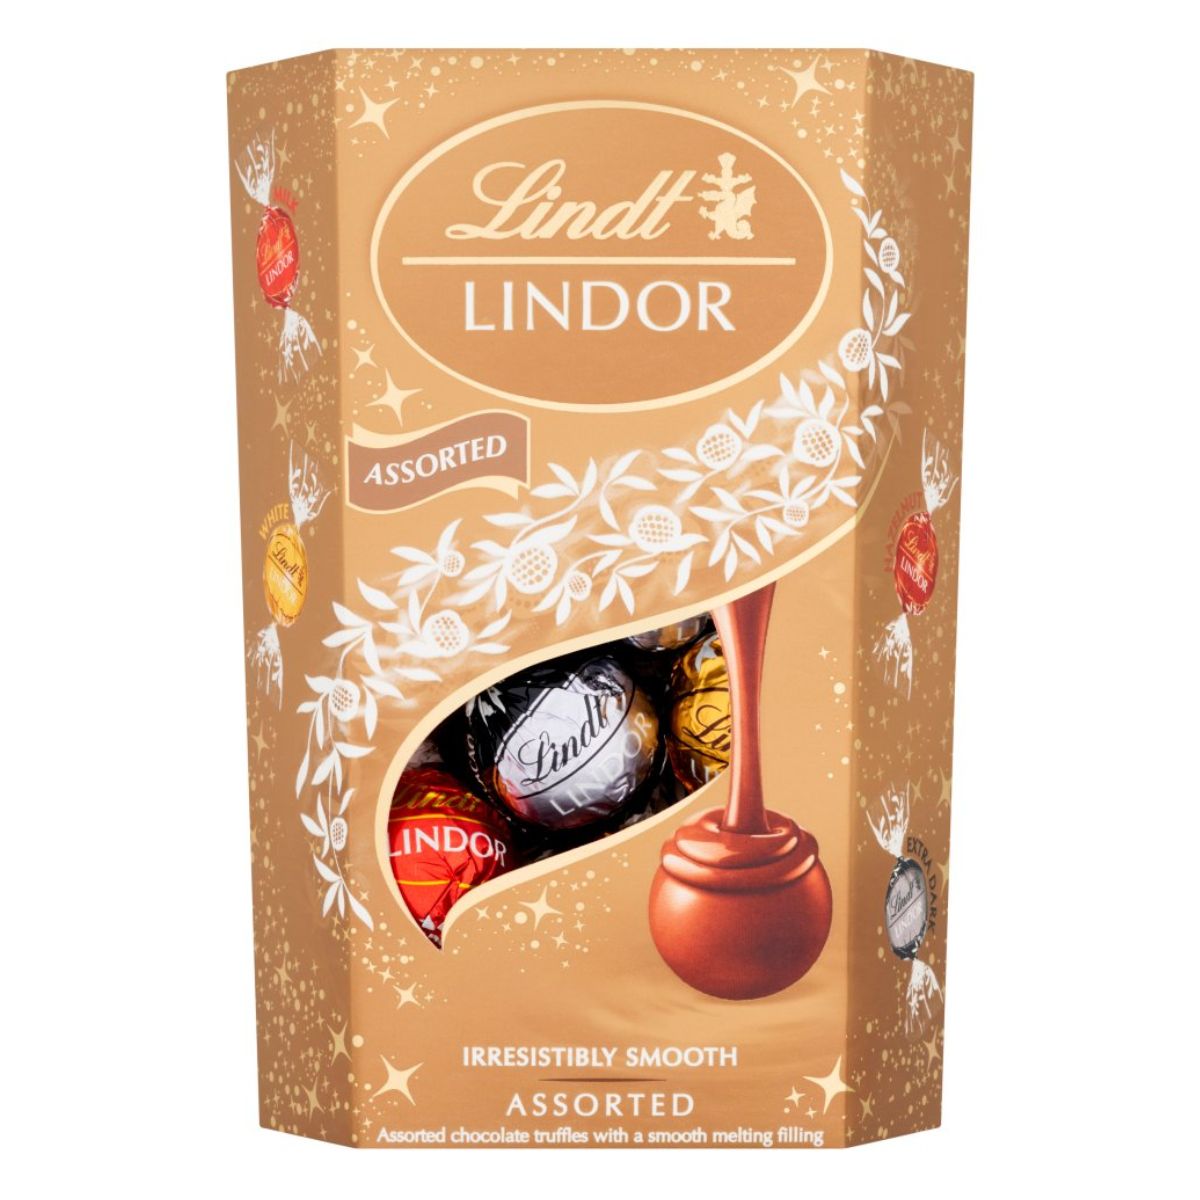 Lindt Lindor - Assorted - 200g chocolates in a box.